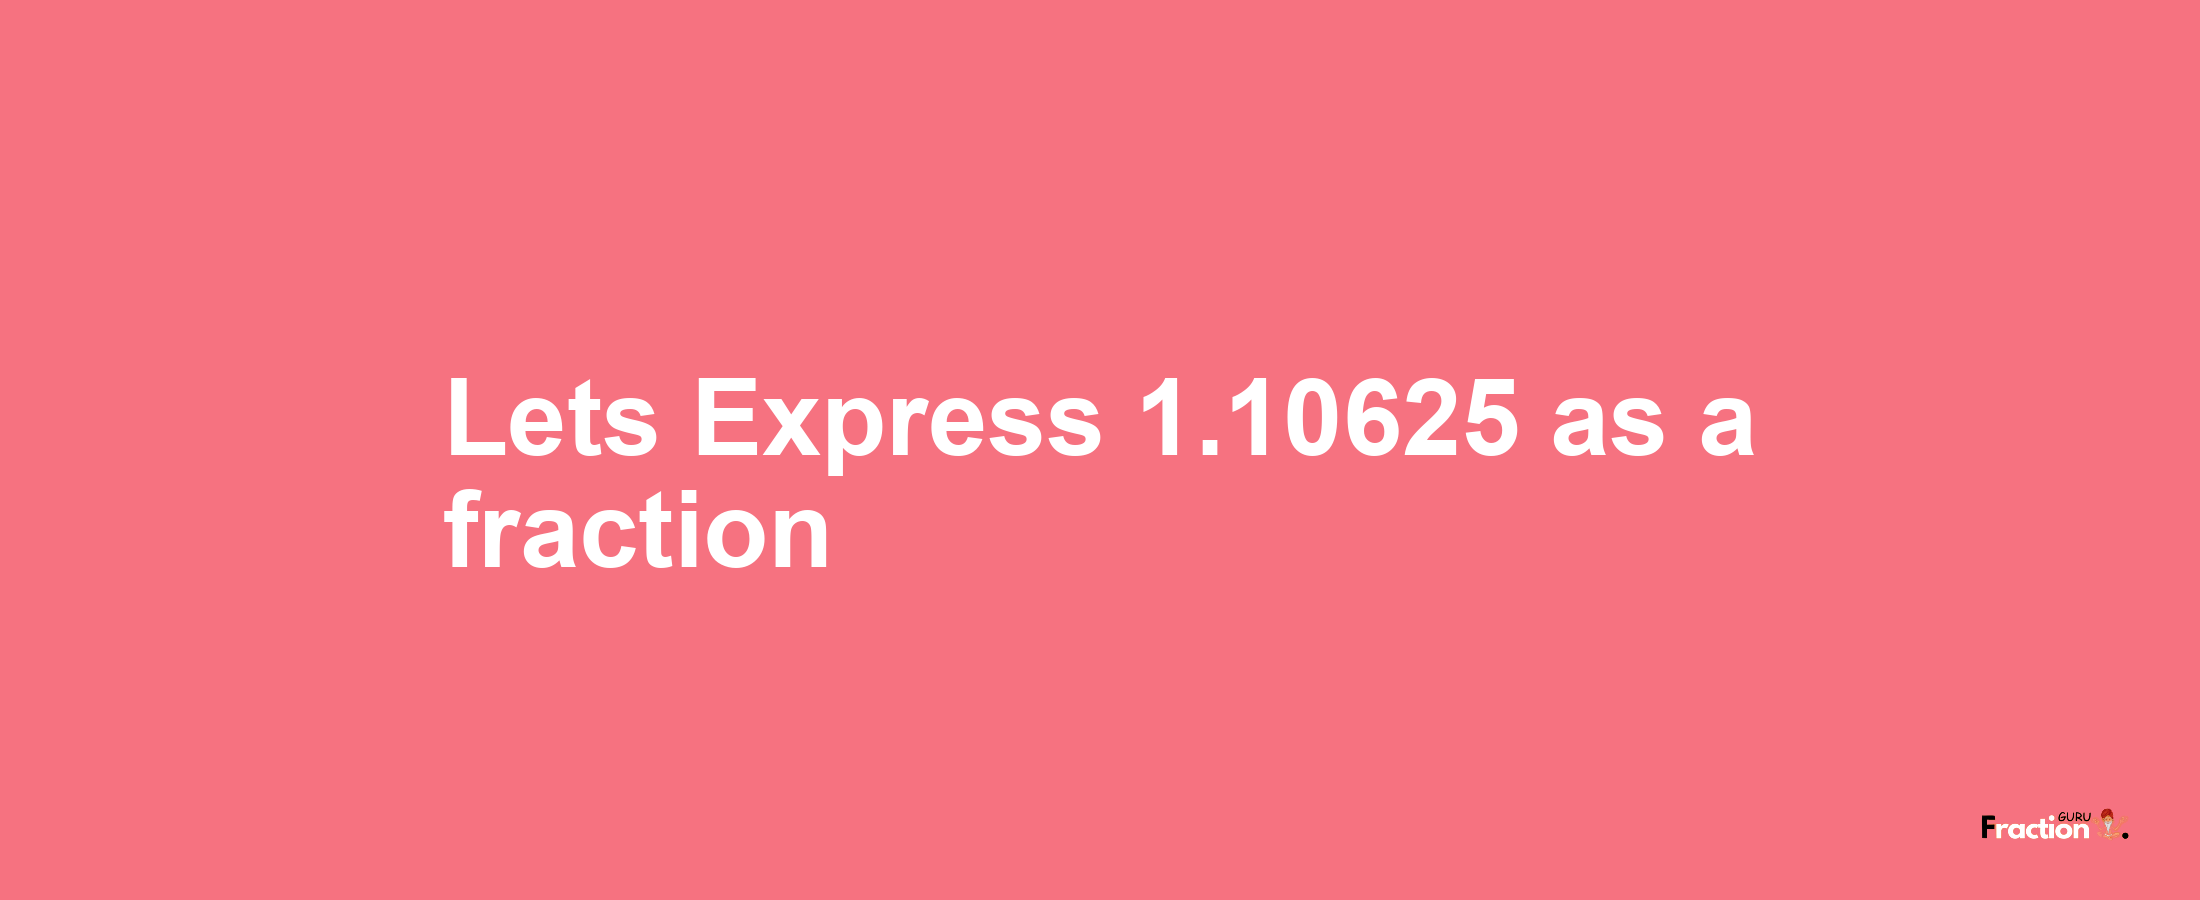 Lets Express 1.10625 as afraction